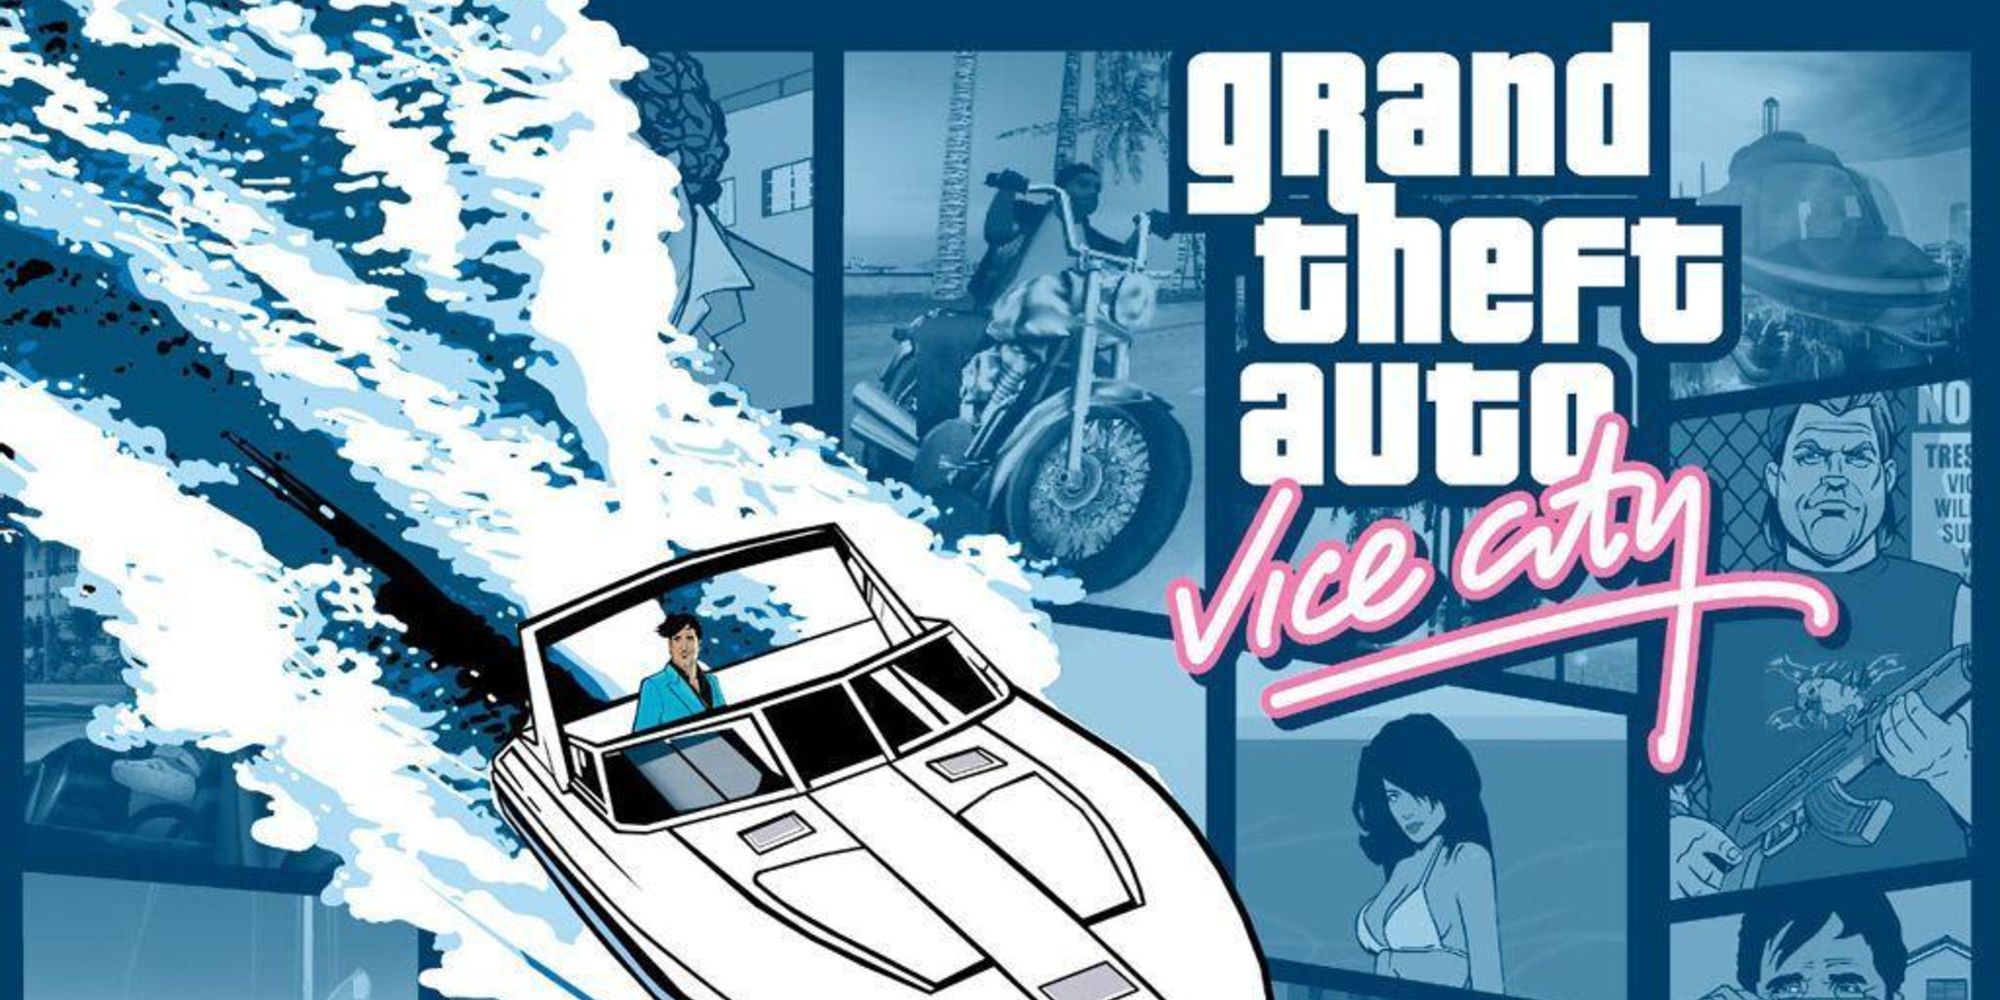 poster for Grand Theft Auto Vice City featuring a man on a speedboat and images in the background